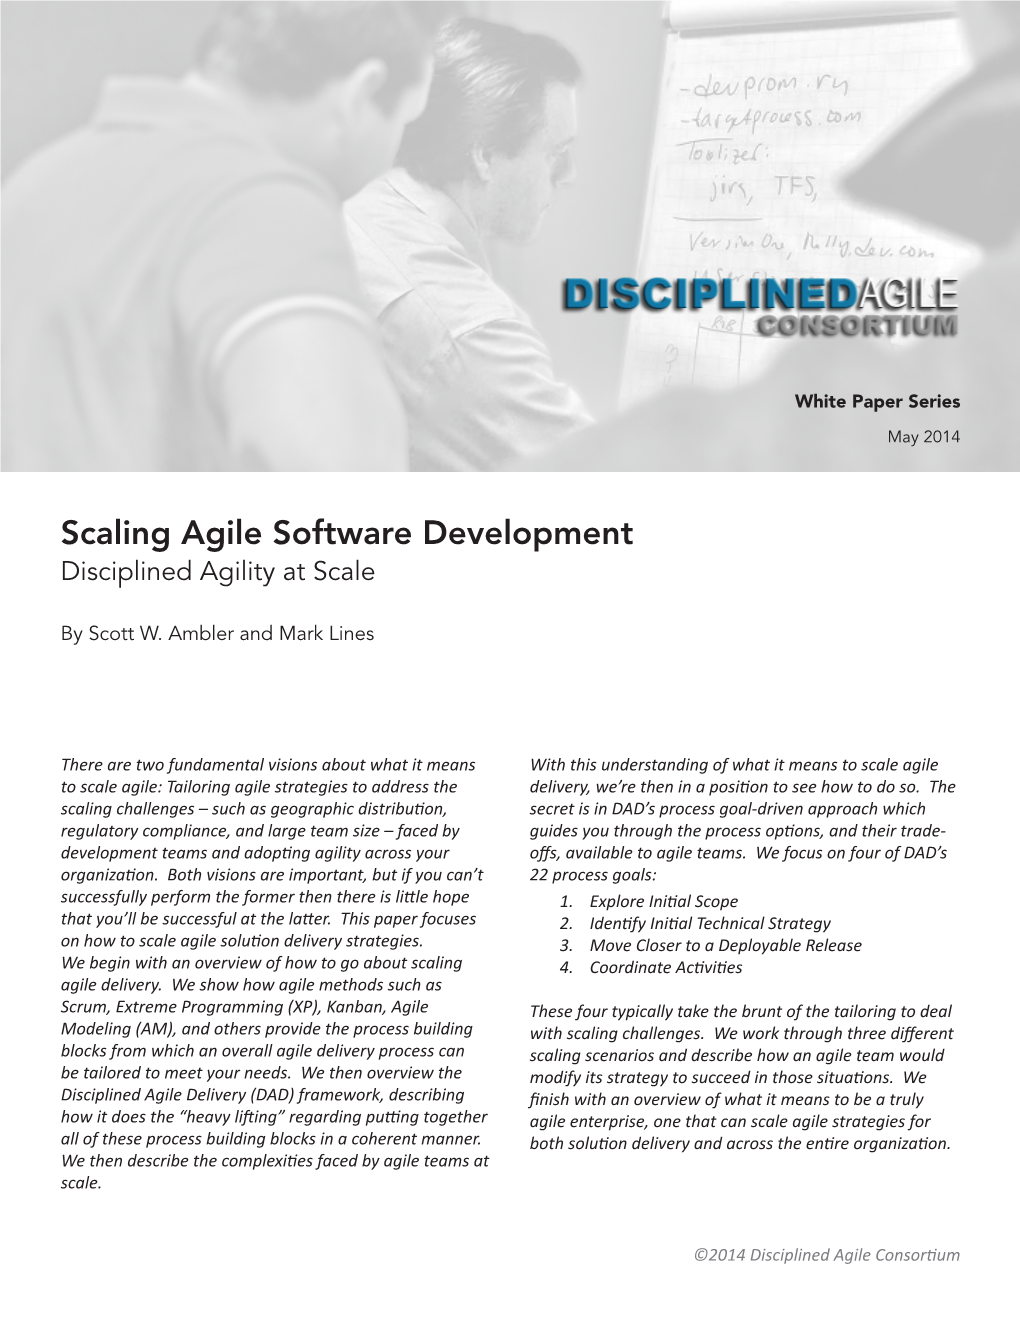 Scaling Agile Software Development Disciplined Agility at Scale